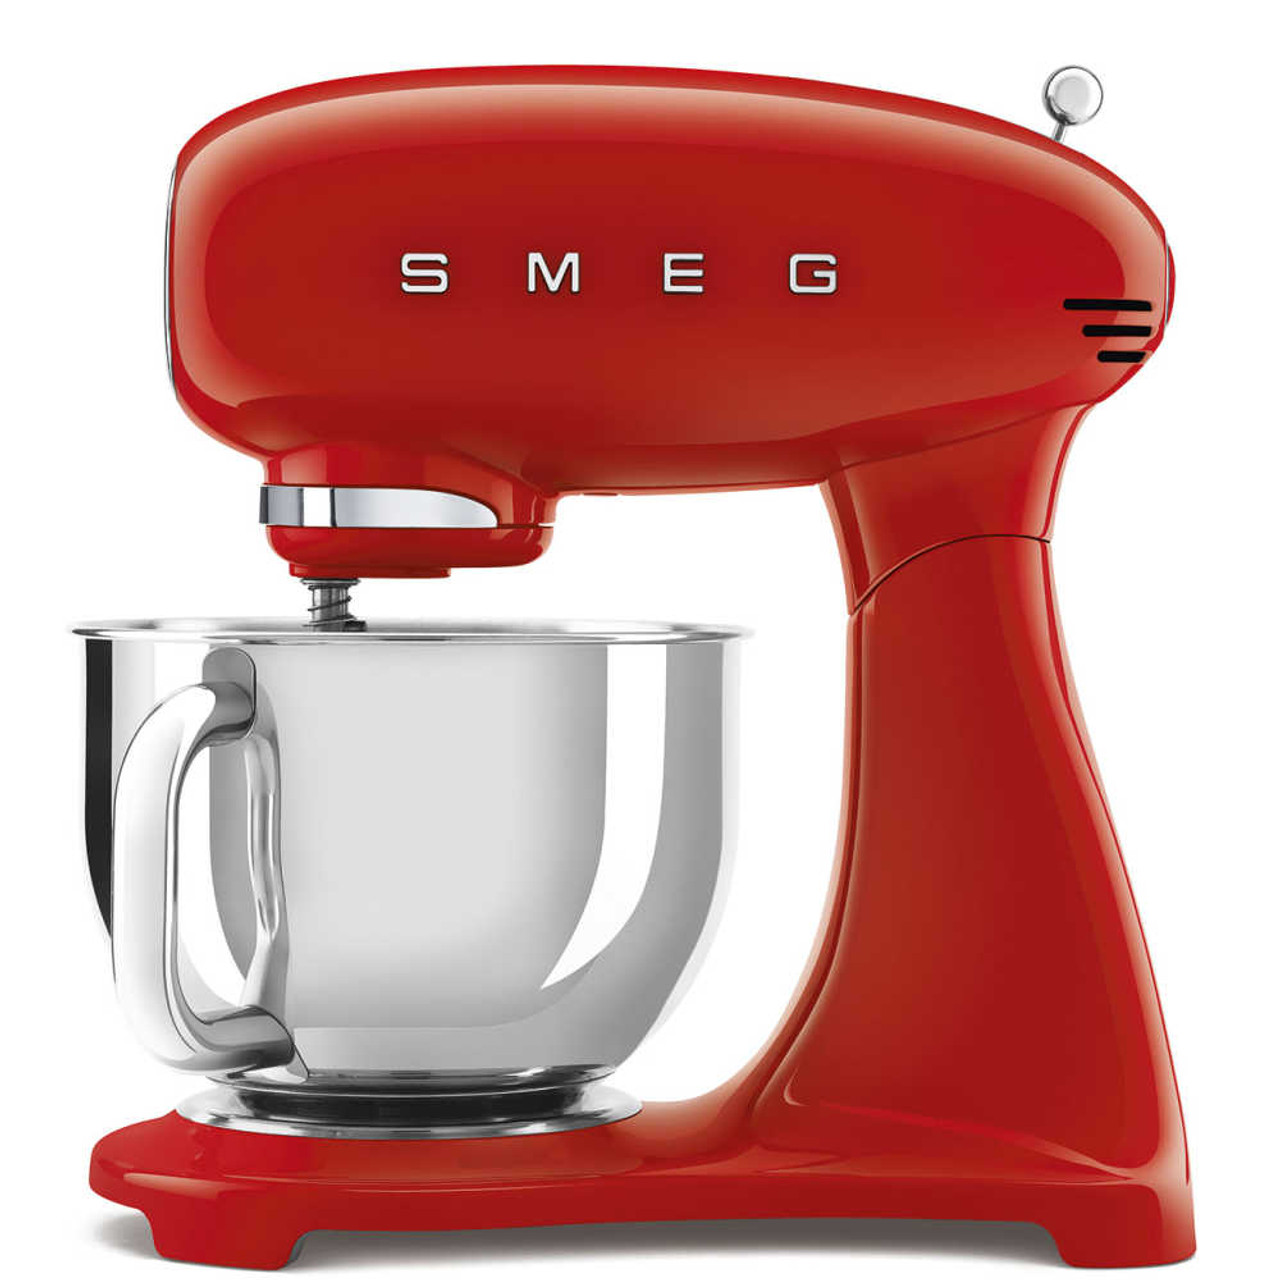 Choose your SMEG blender from a wide-range of colors and options